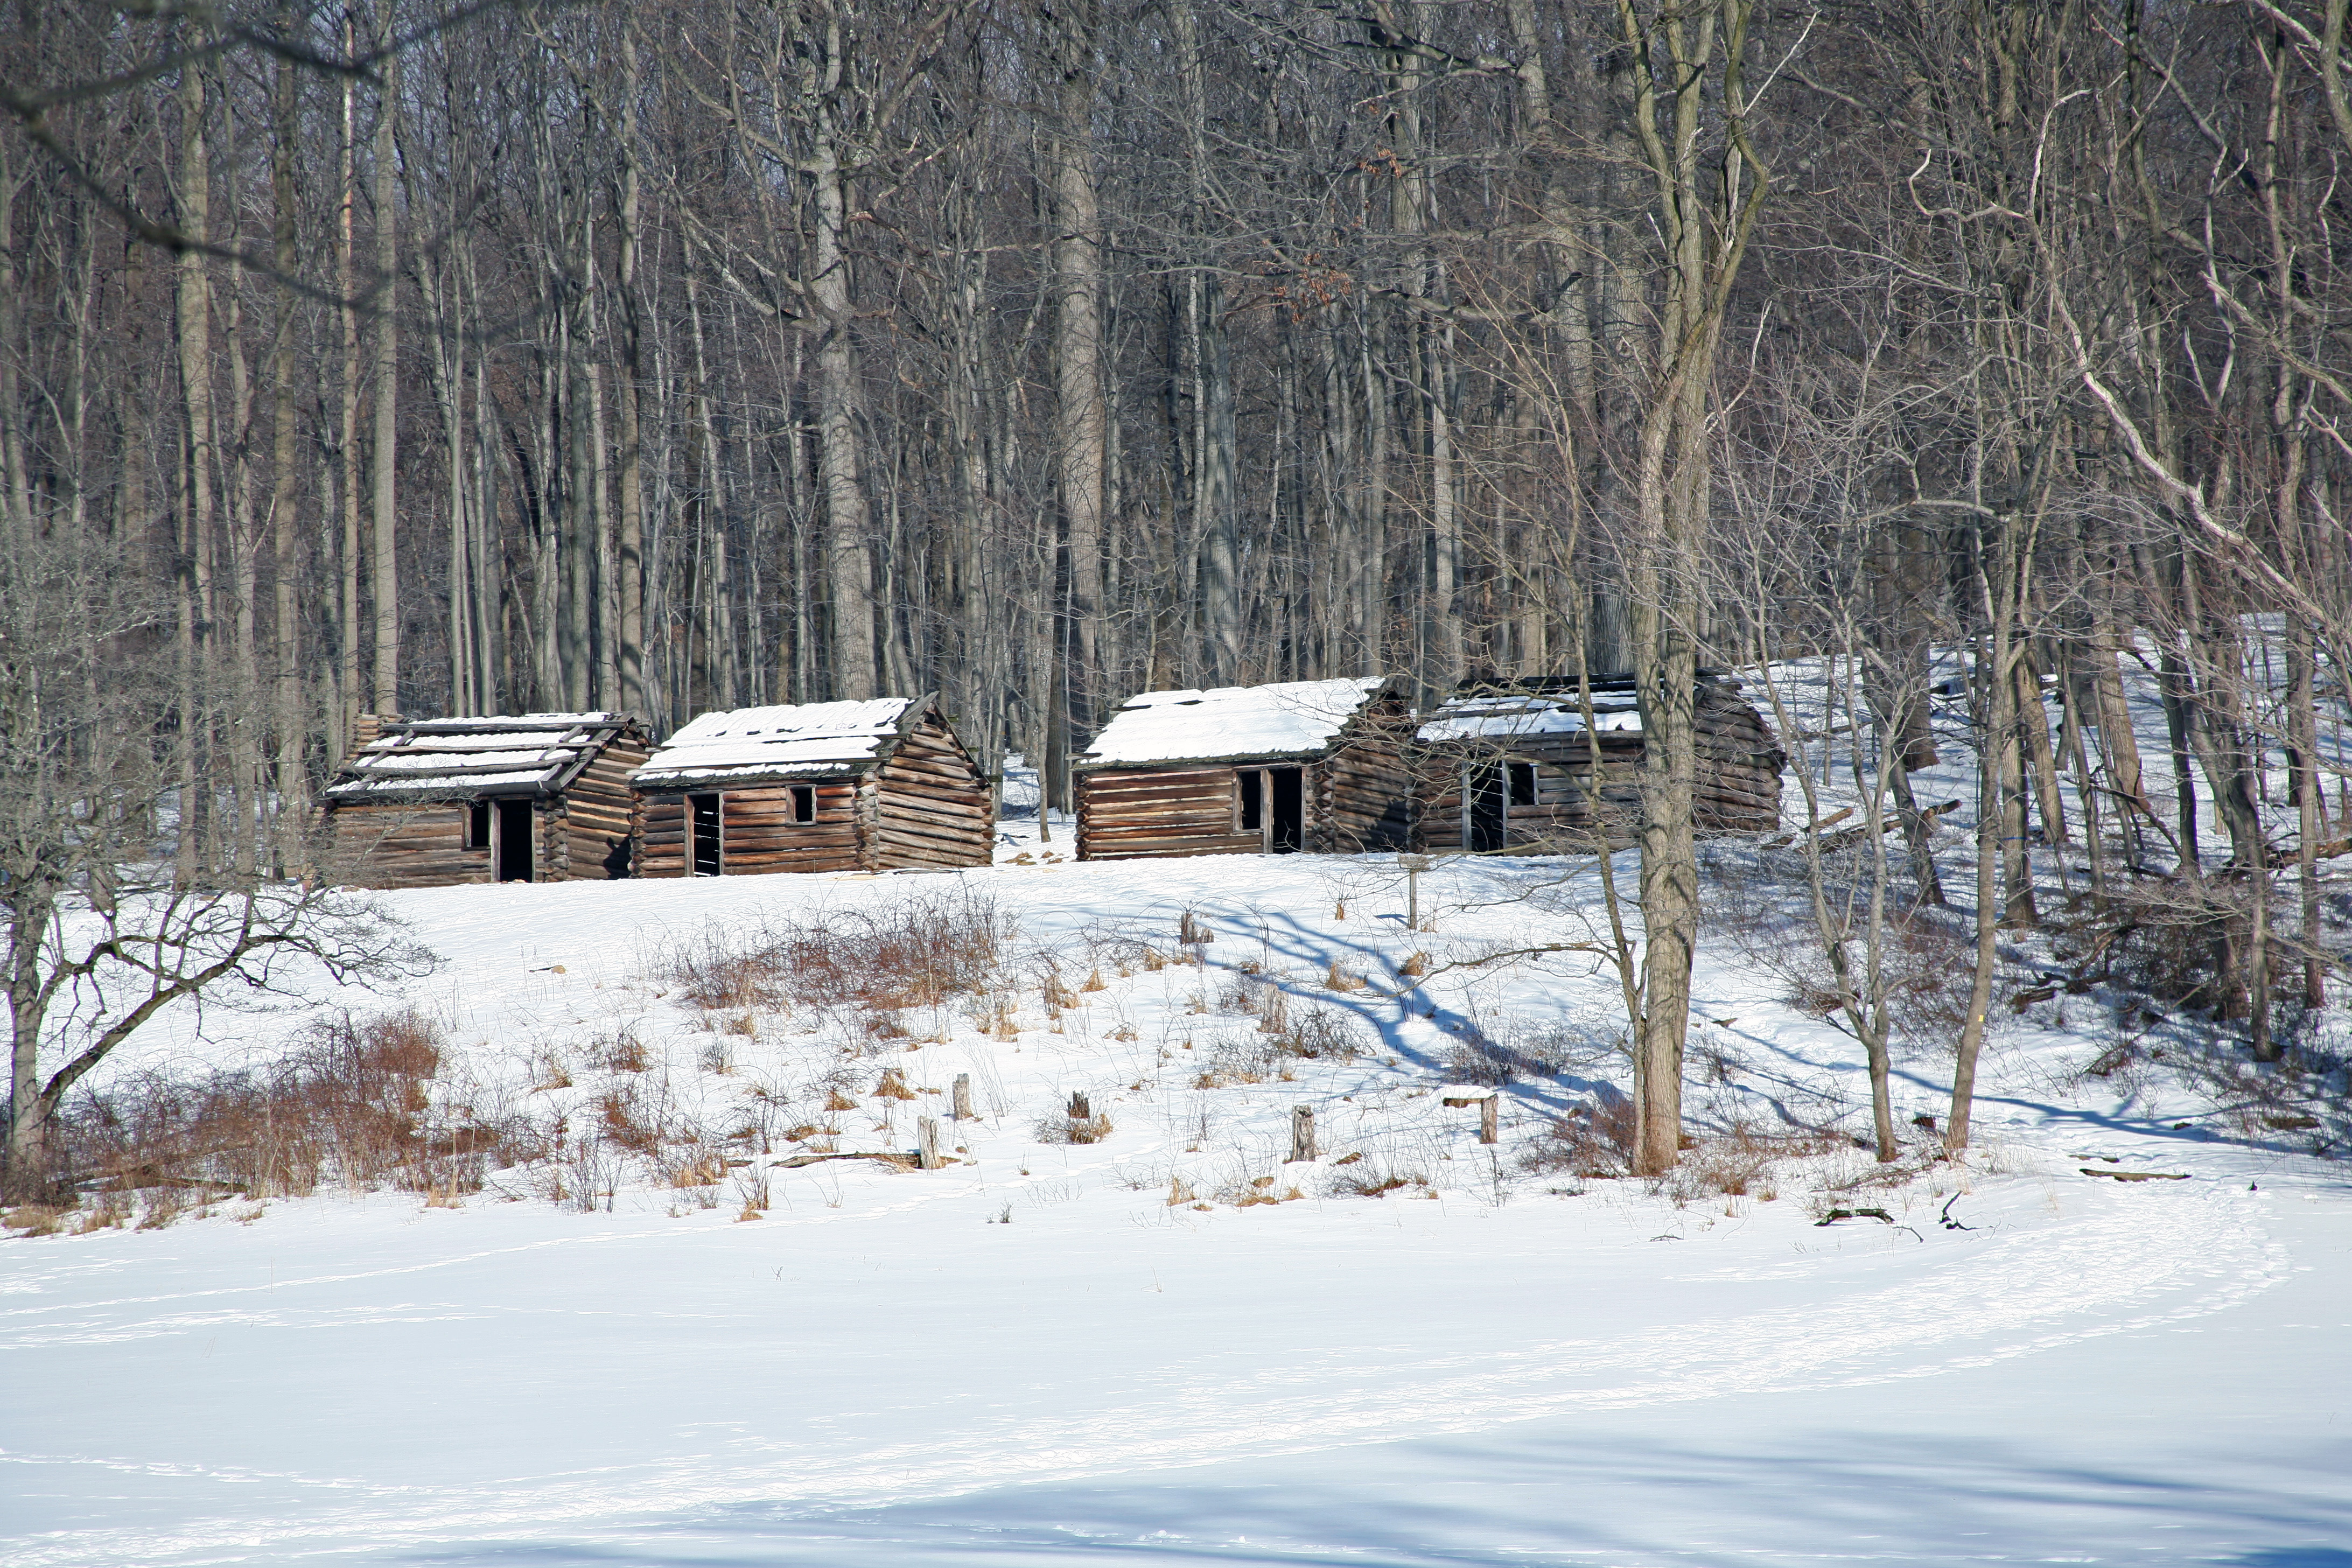 Four replica wooden soldier huts on a hillside in winter